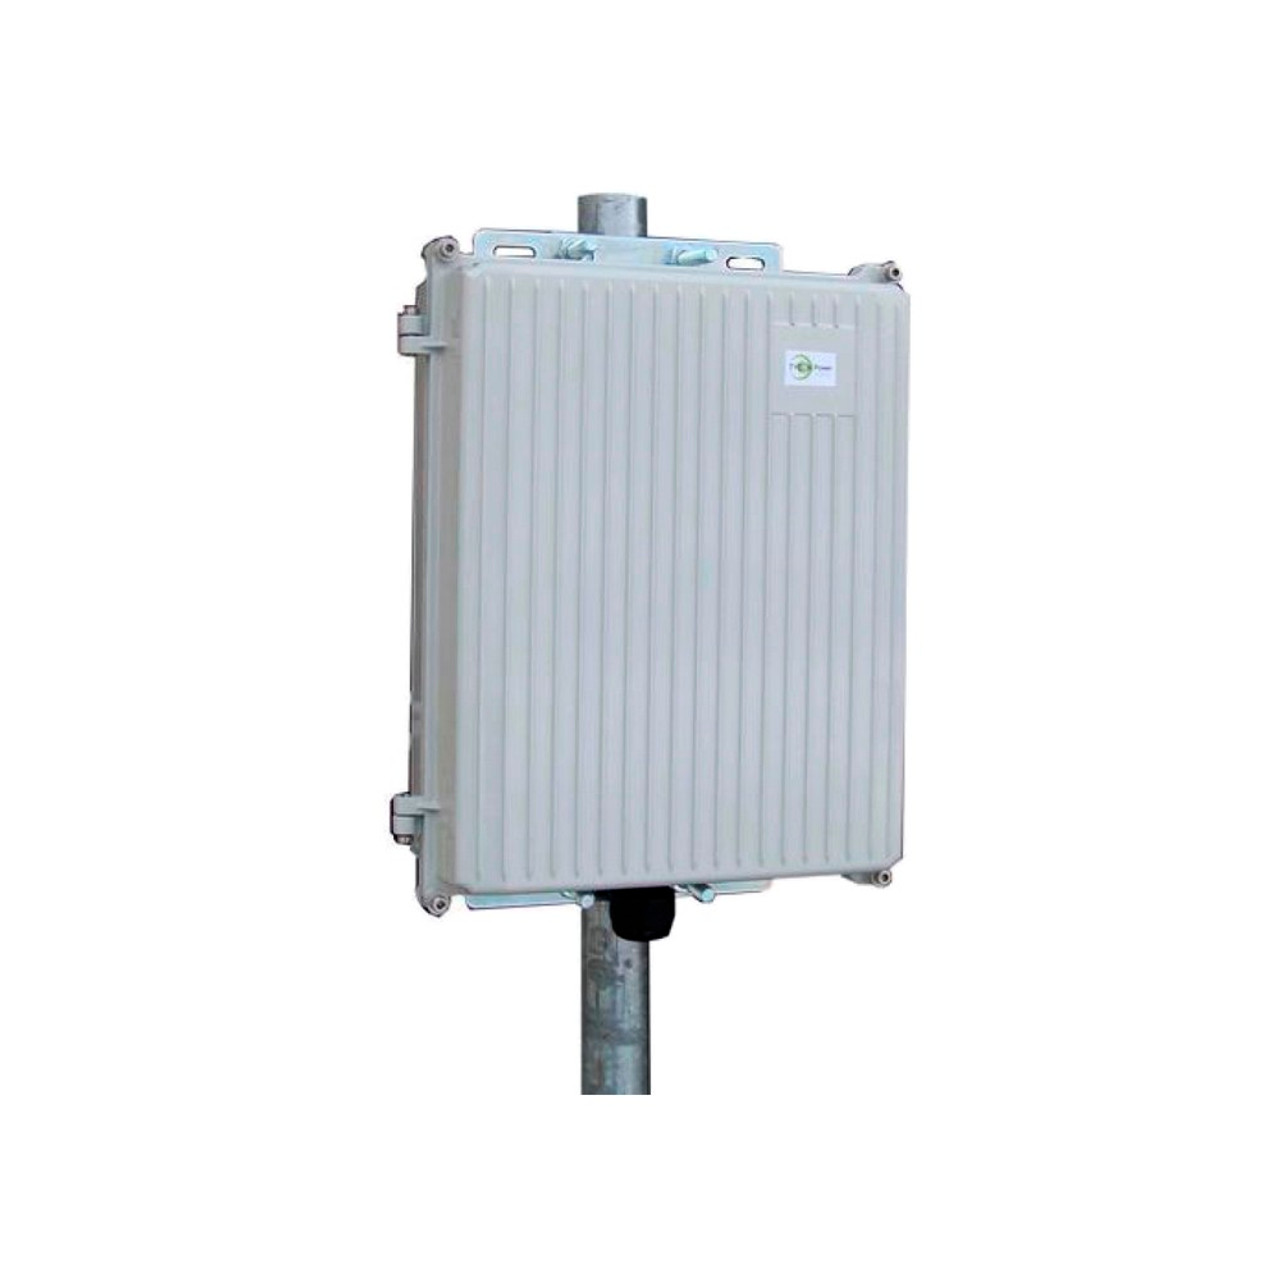 Tycon UPSPro30W Outdoor Backup Power System. 9Ah Battery. 12V with 24V  Passive PoE. Pole/Wall Mt